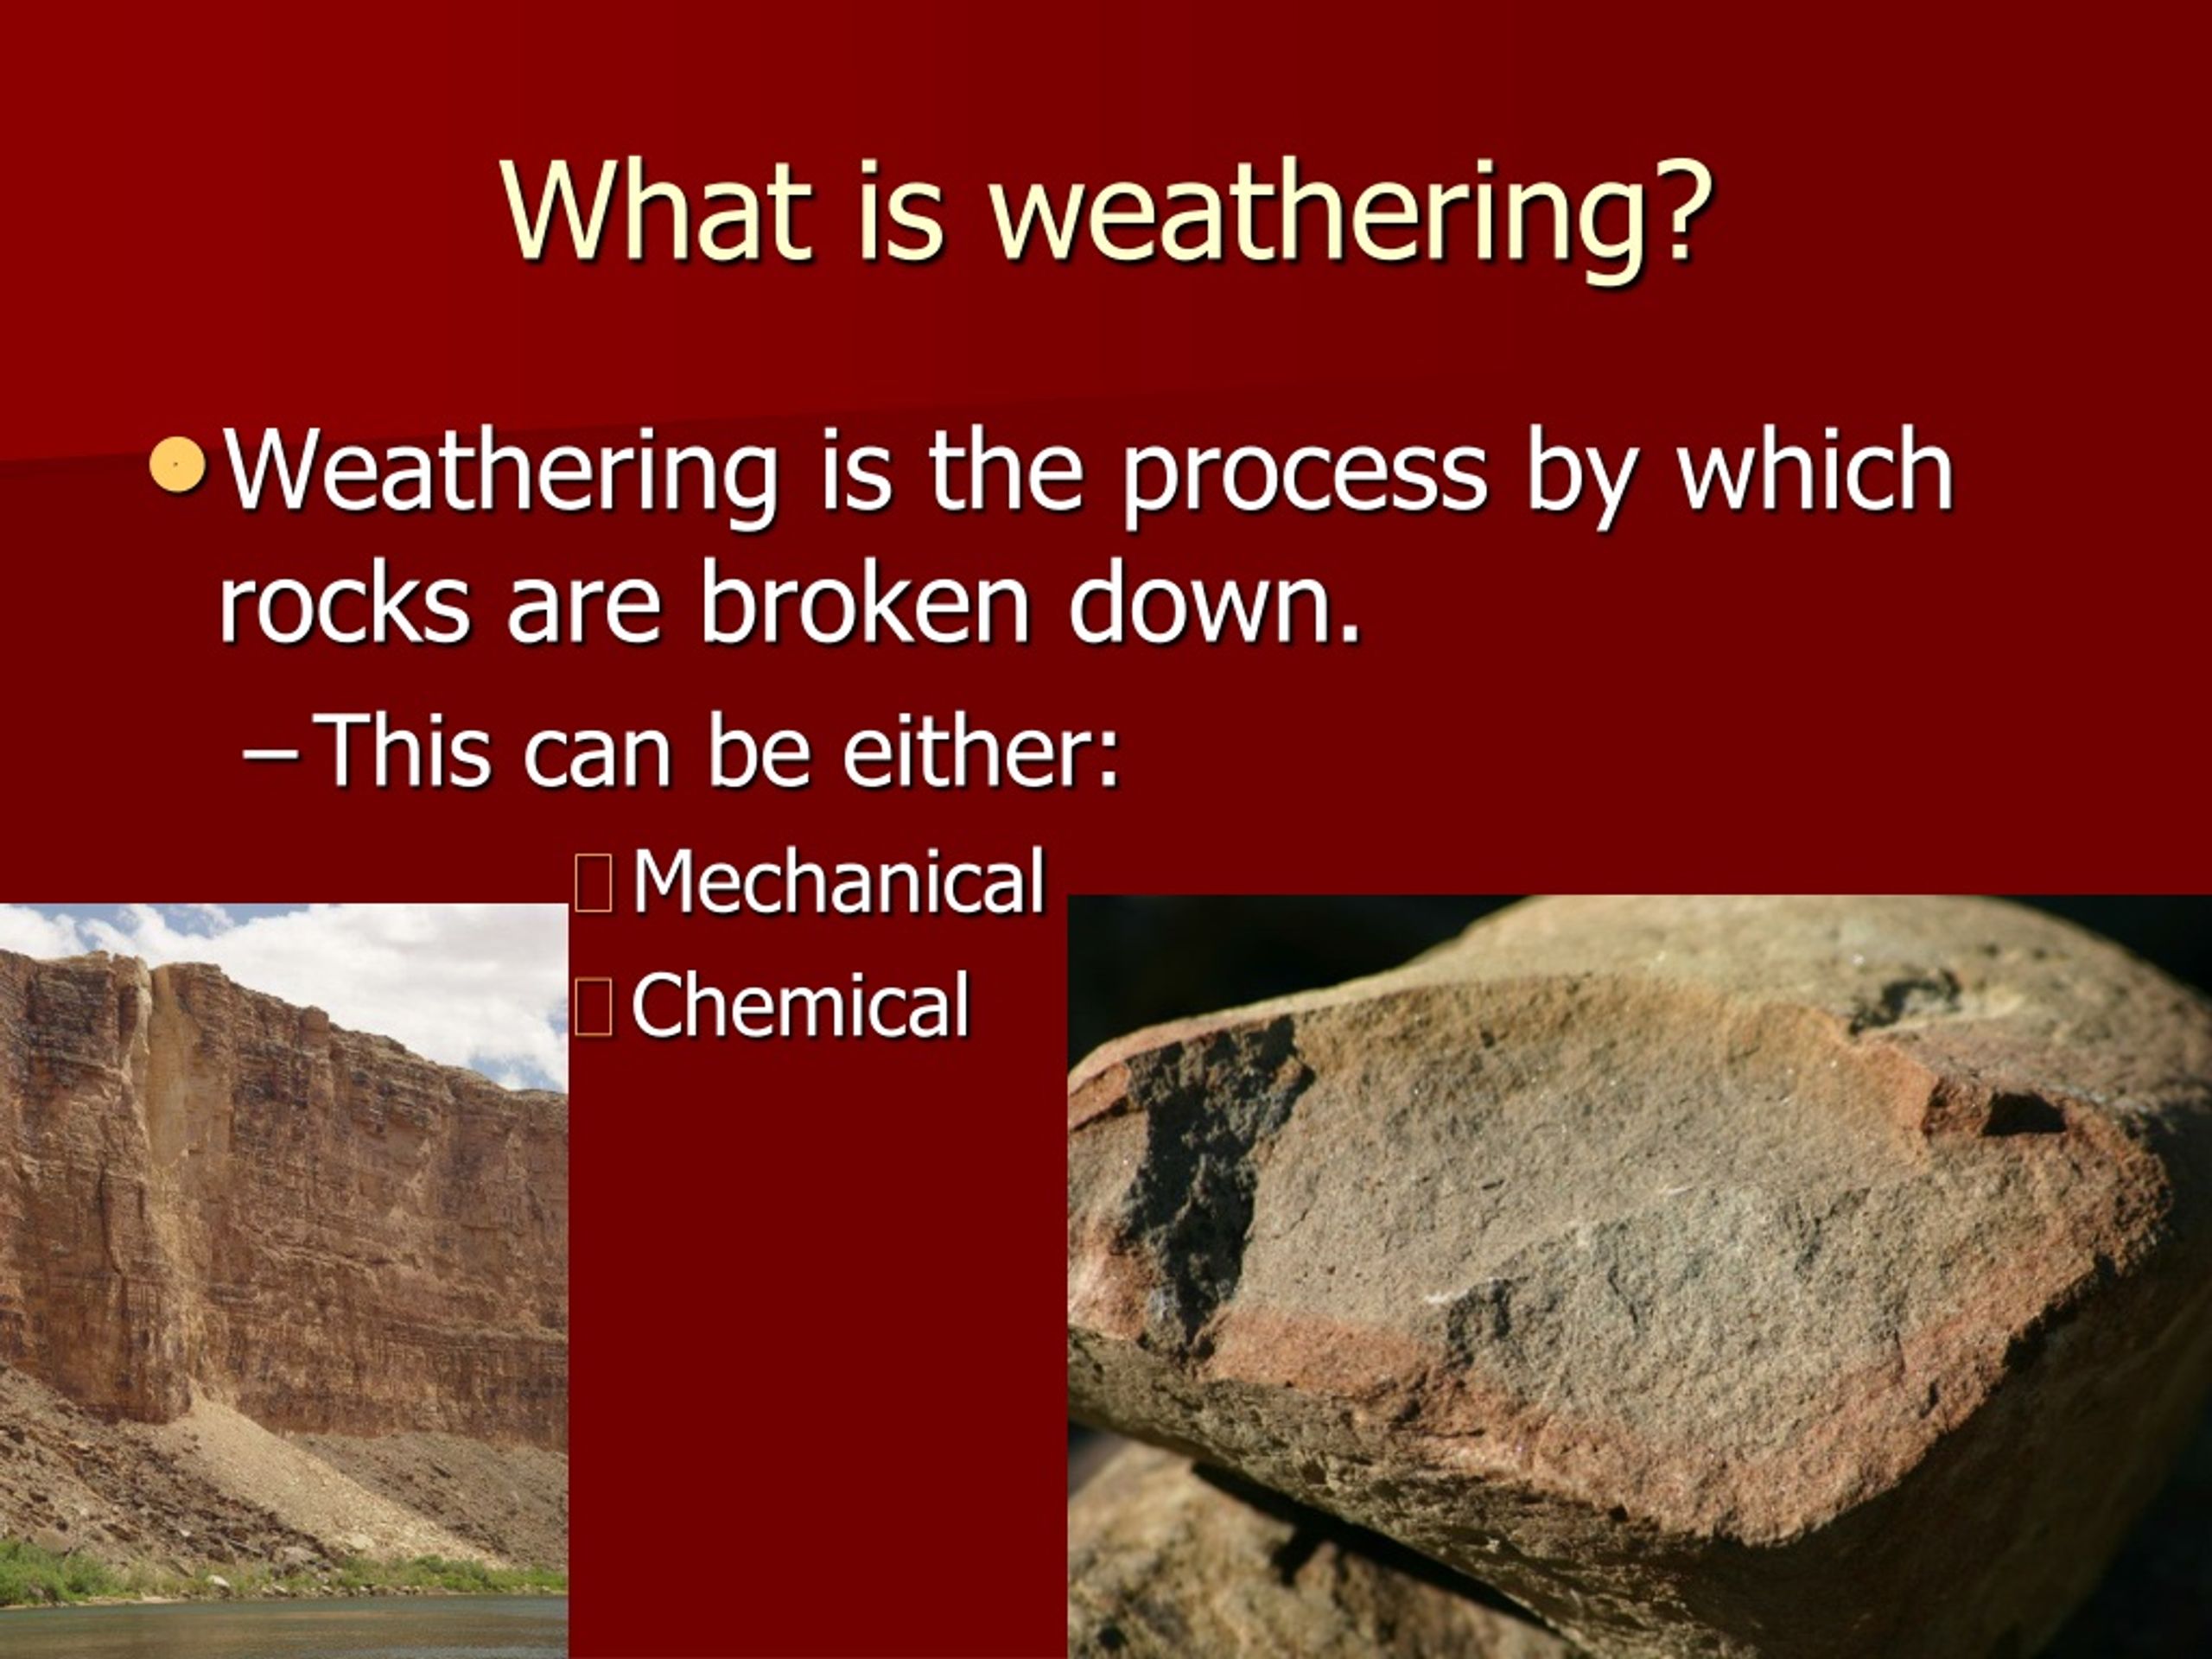 what is weathering hypothesis